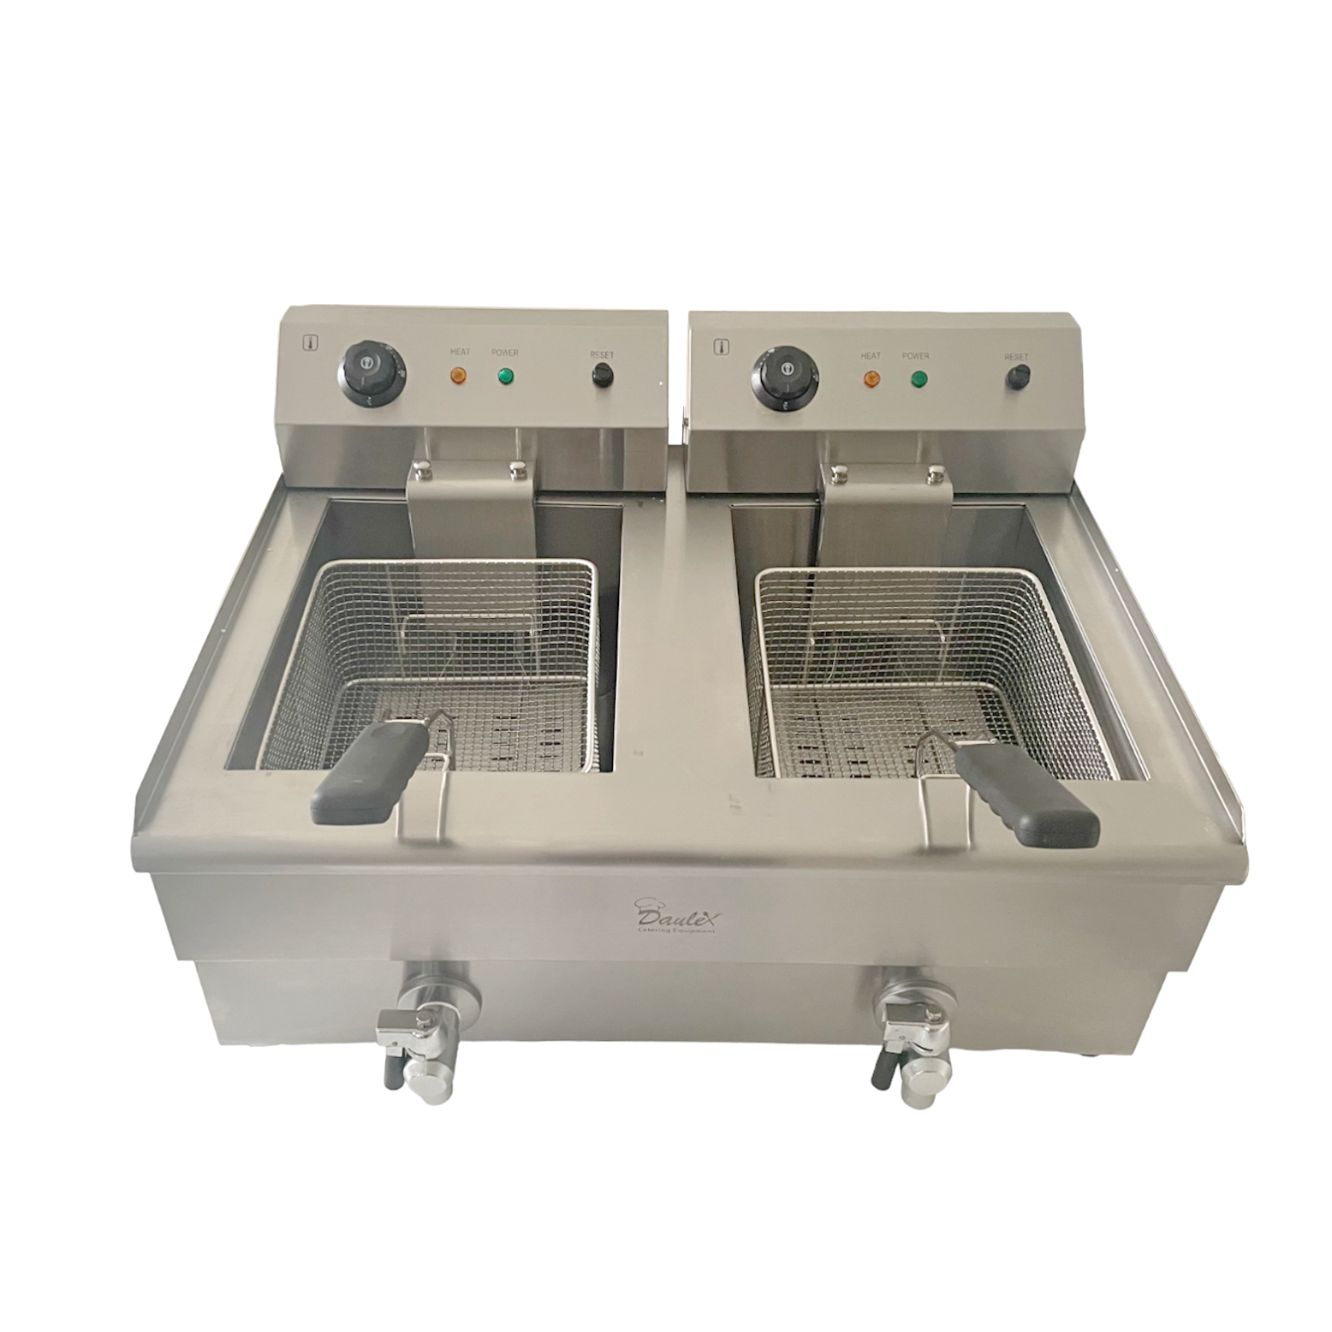 Davlex stainless steel double electric fryer front open